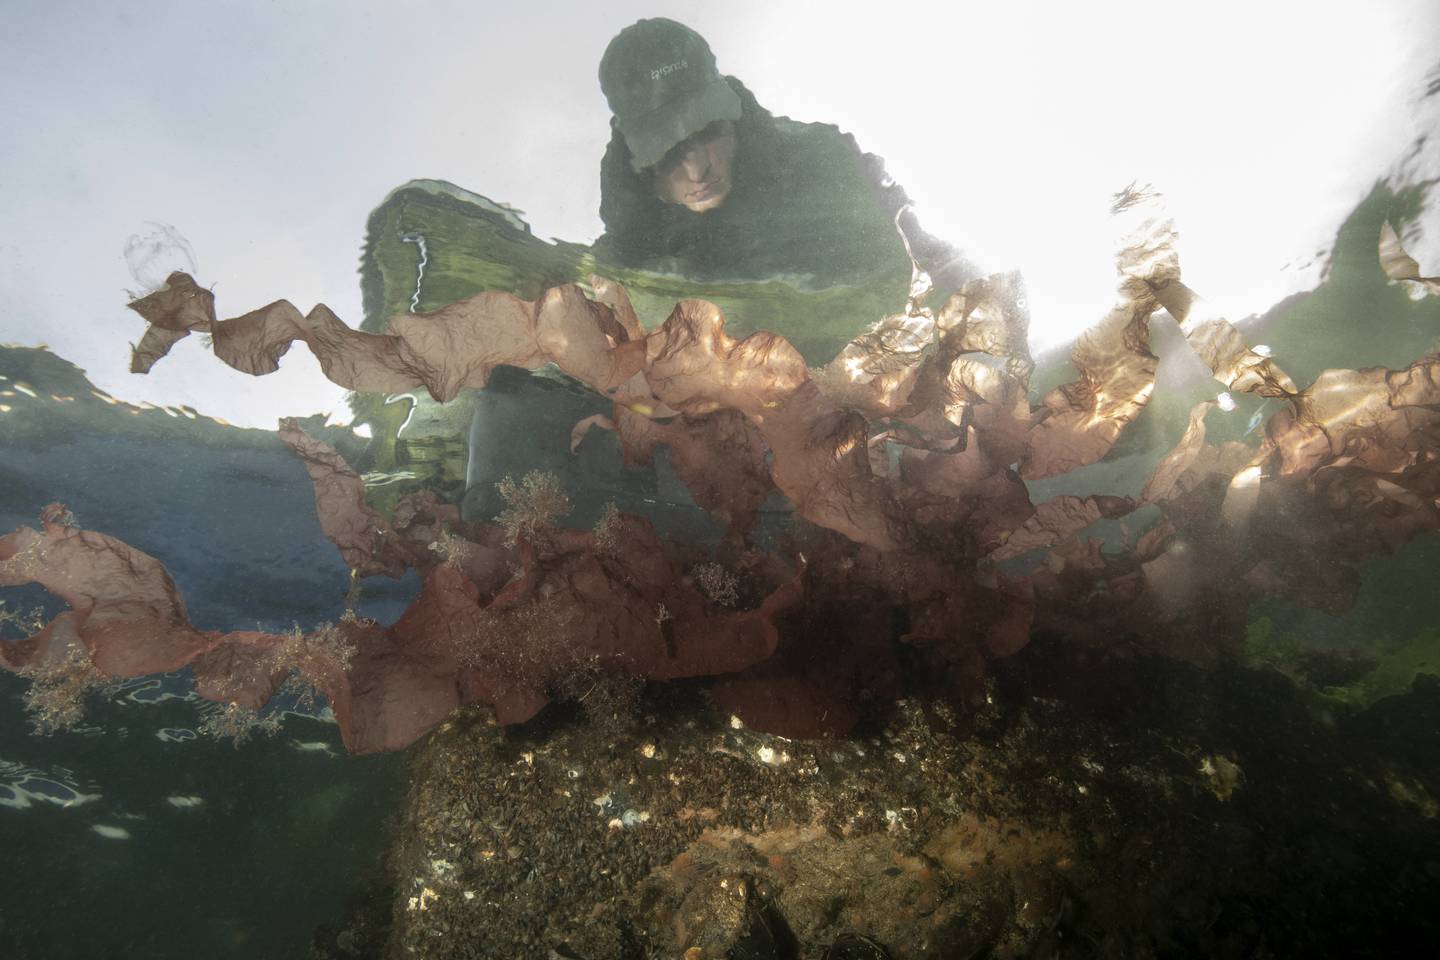 Djevletunge is a red algae that can grow up to three meters in length.  In 2019, it was discovered for the first time in Norway.  According to the Institute of Marine Research, the species 